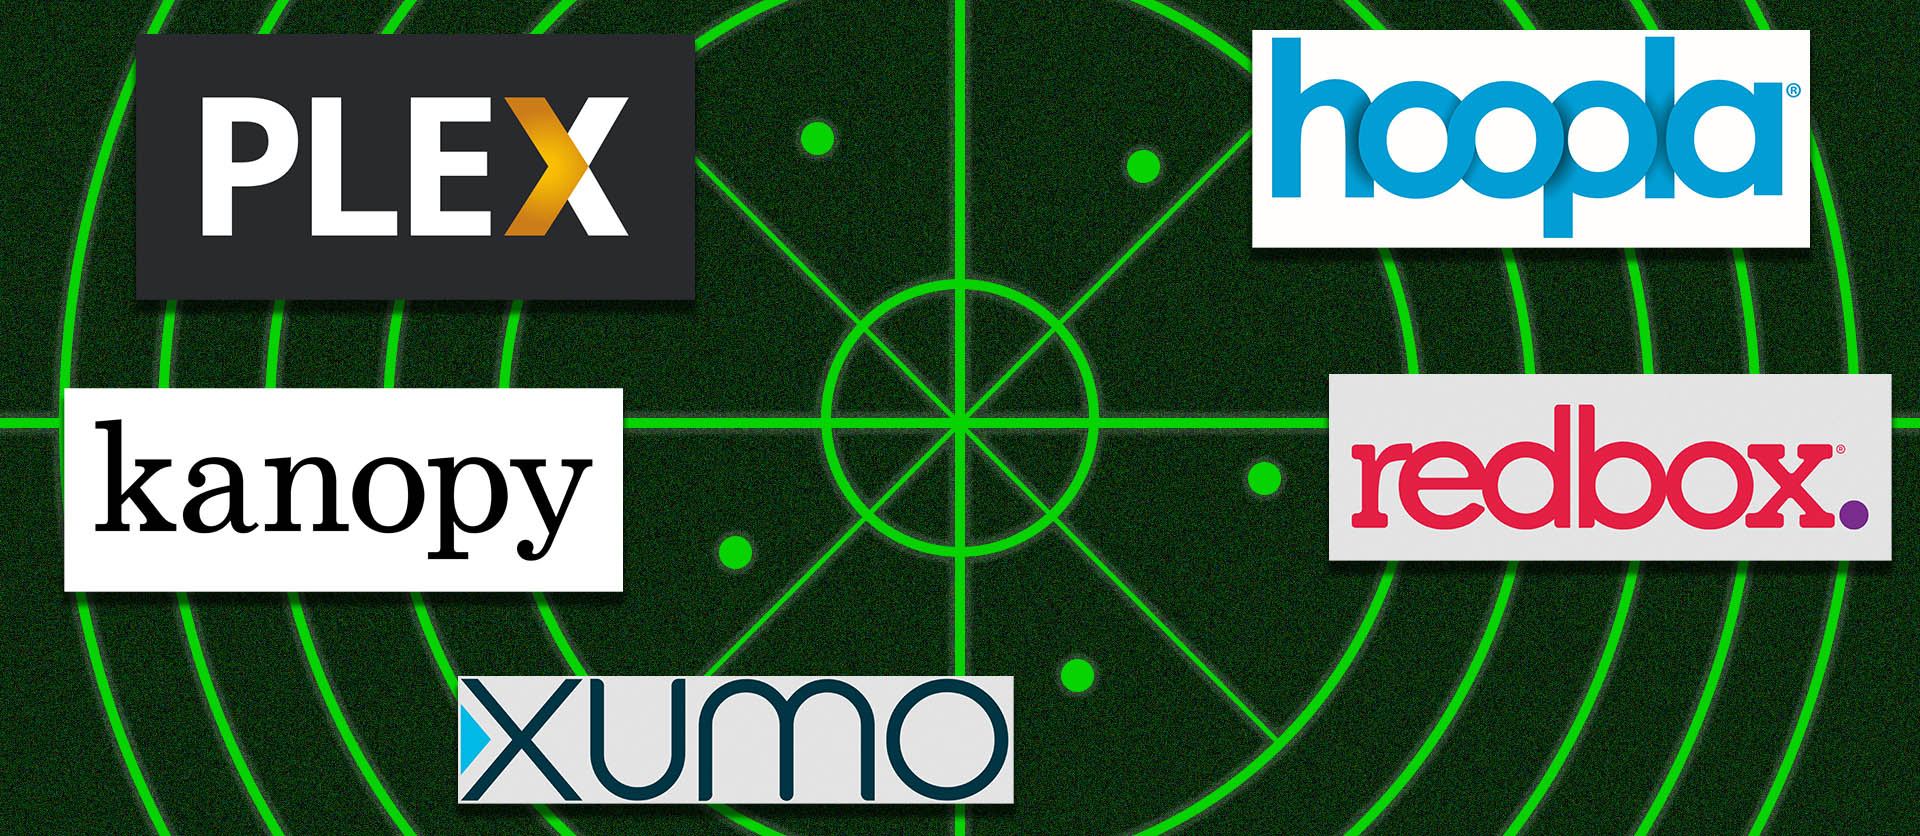 Video: Your Favorite Under-The-Radar Free Streaming Services